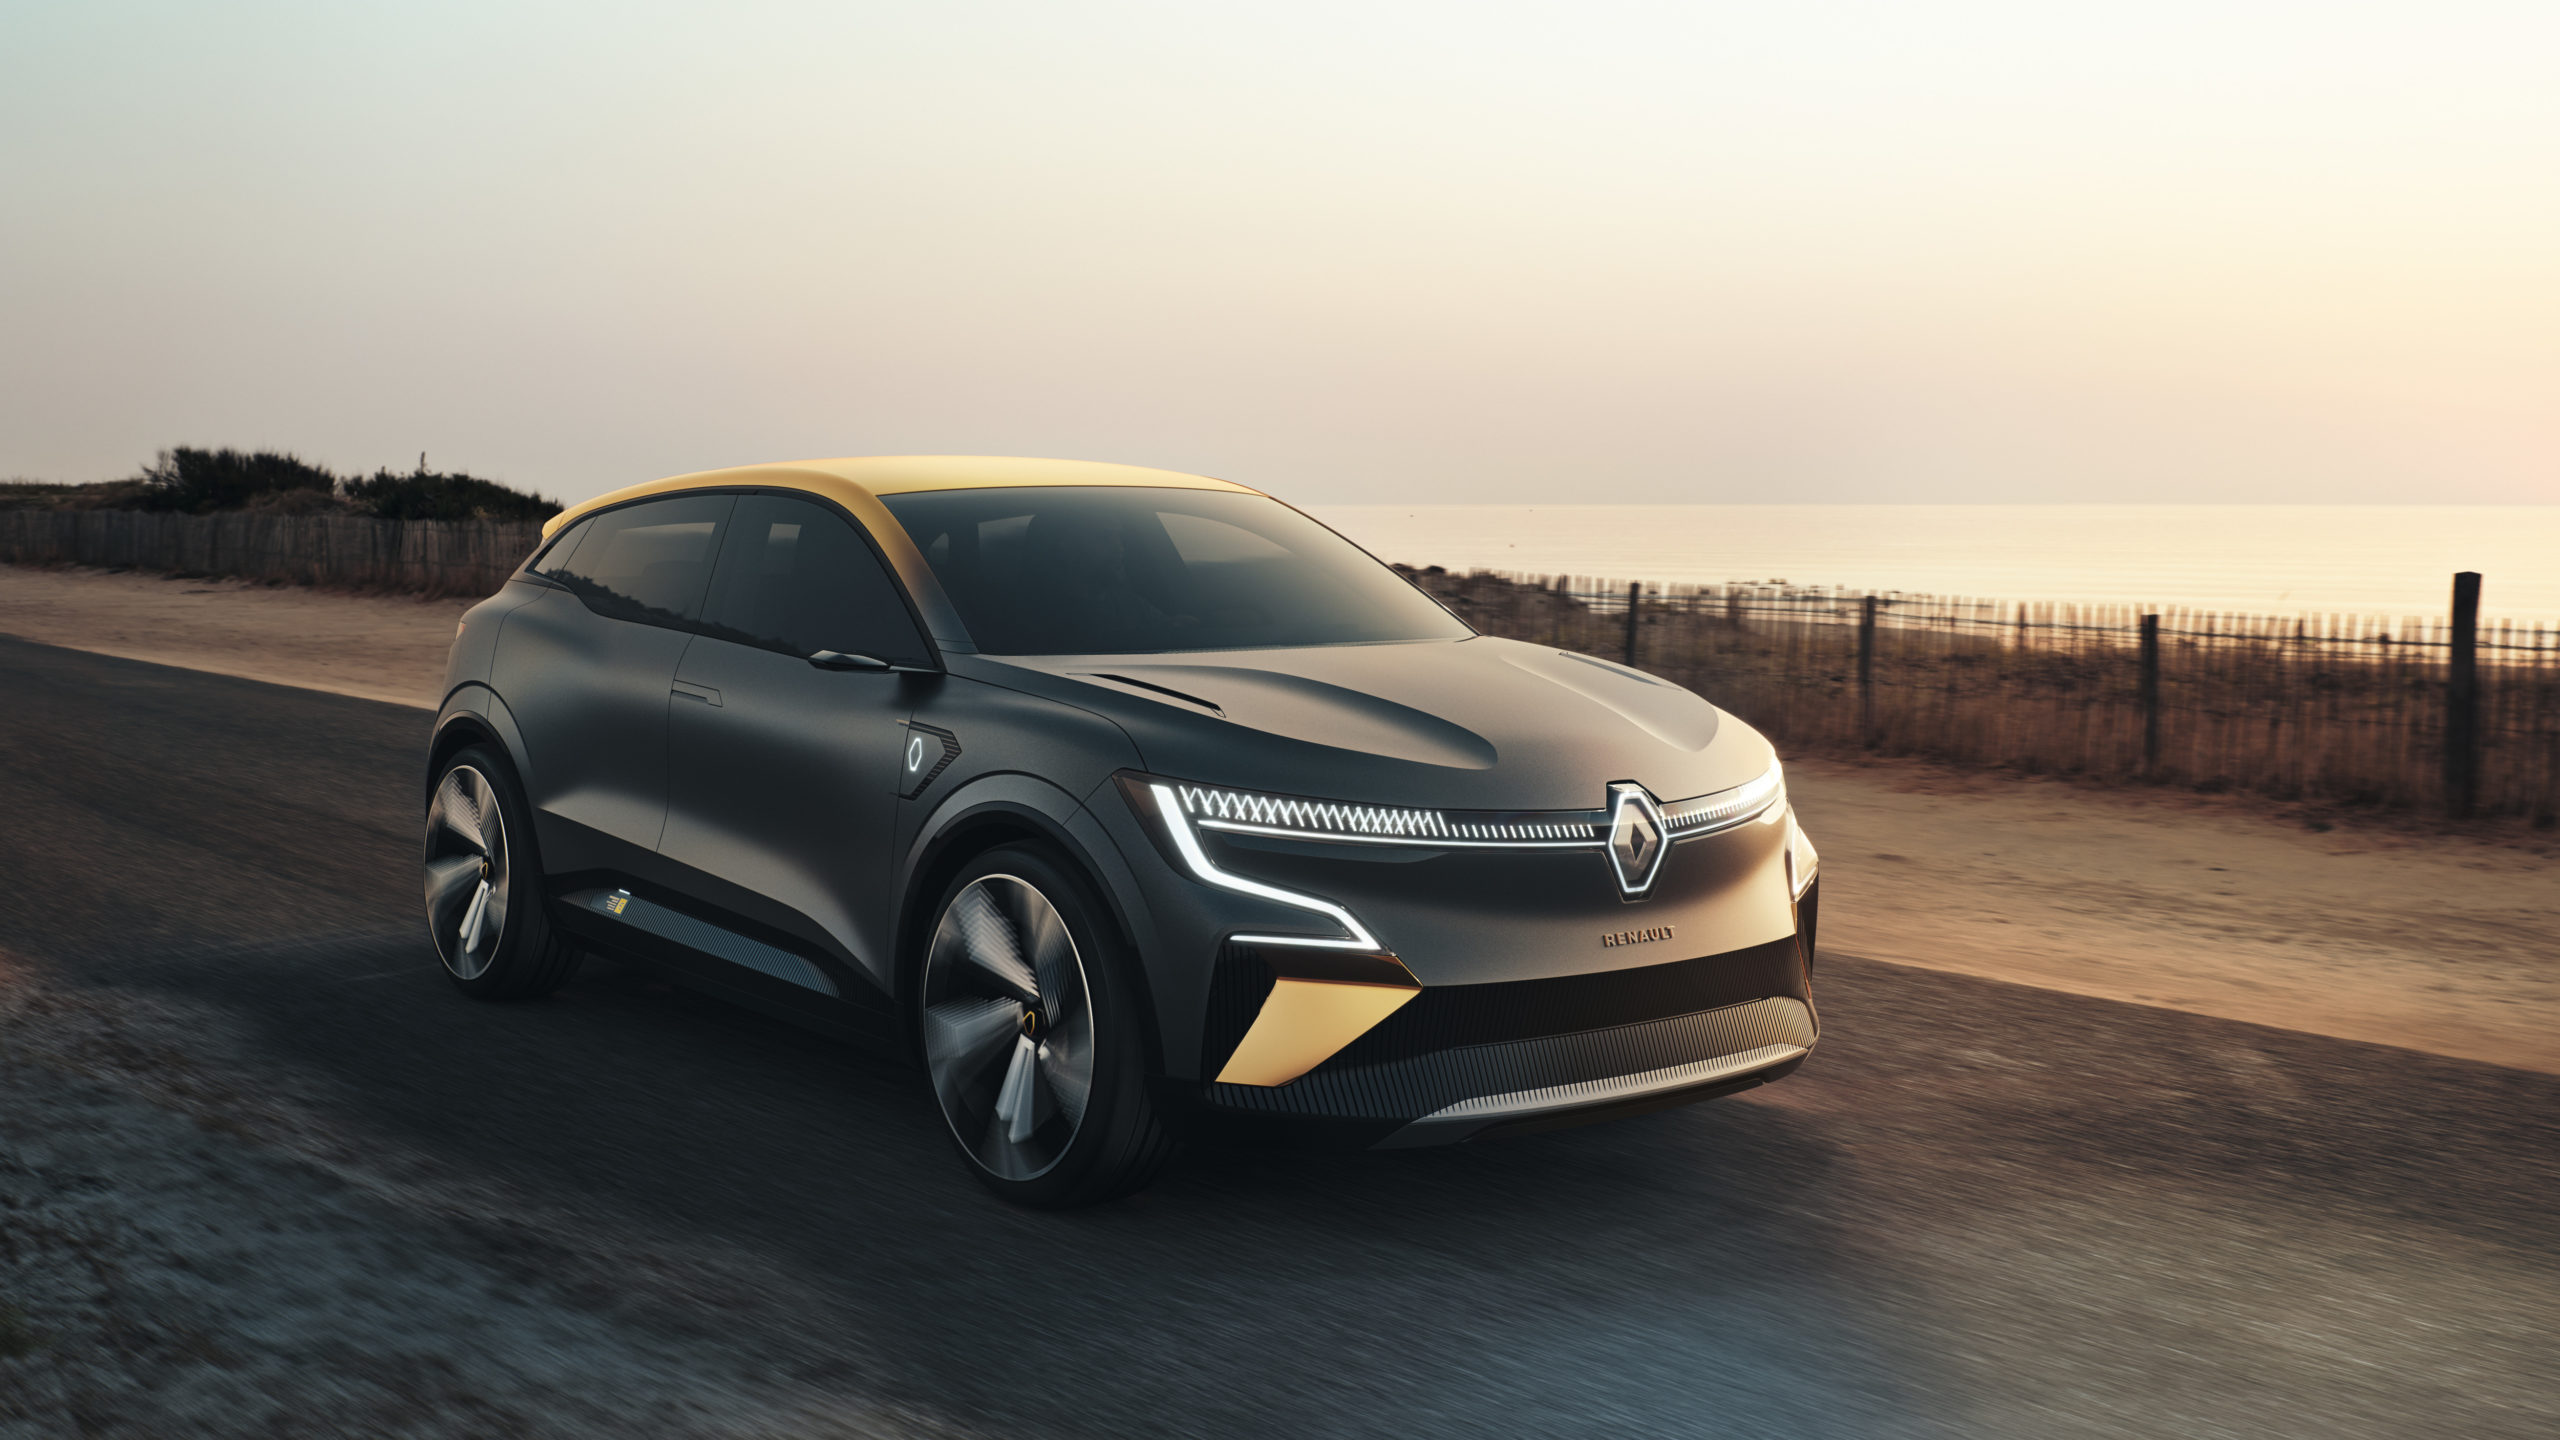 Renault’s new electric offensive: Mégane eVision and Dacia Spring